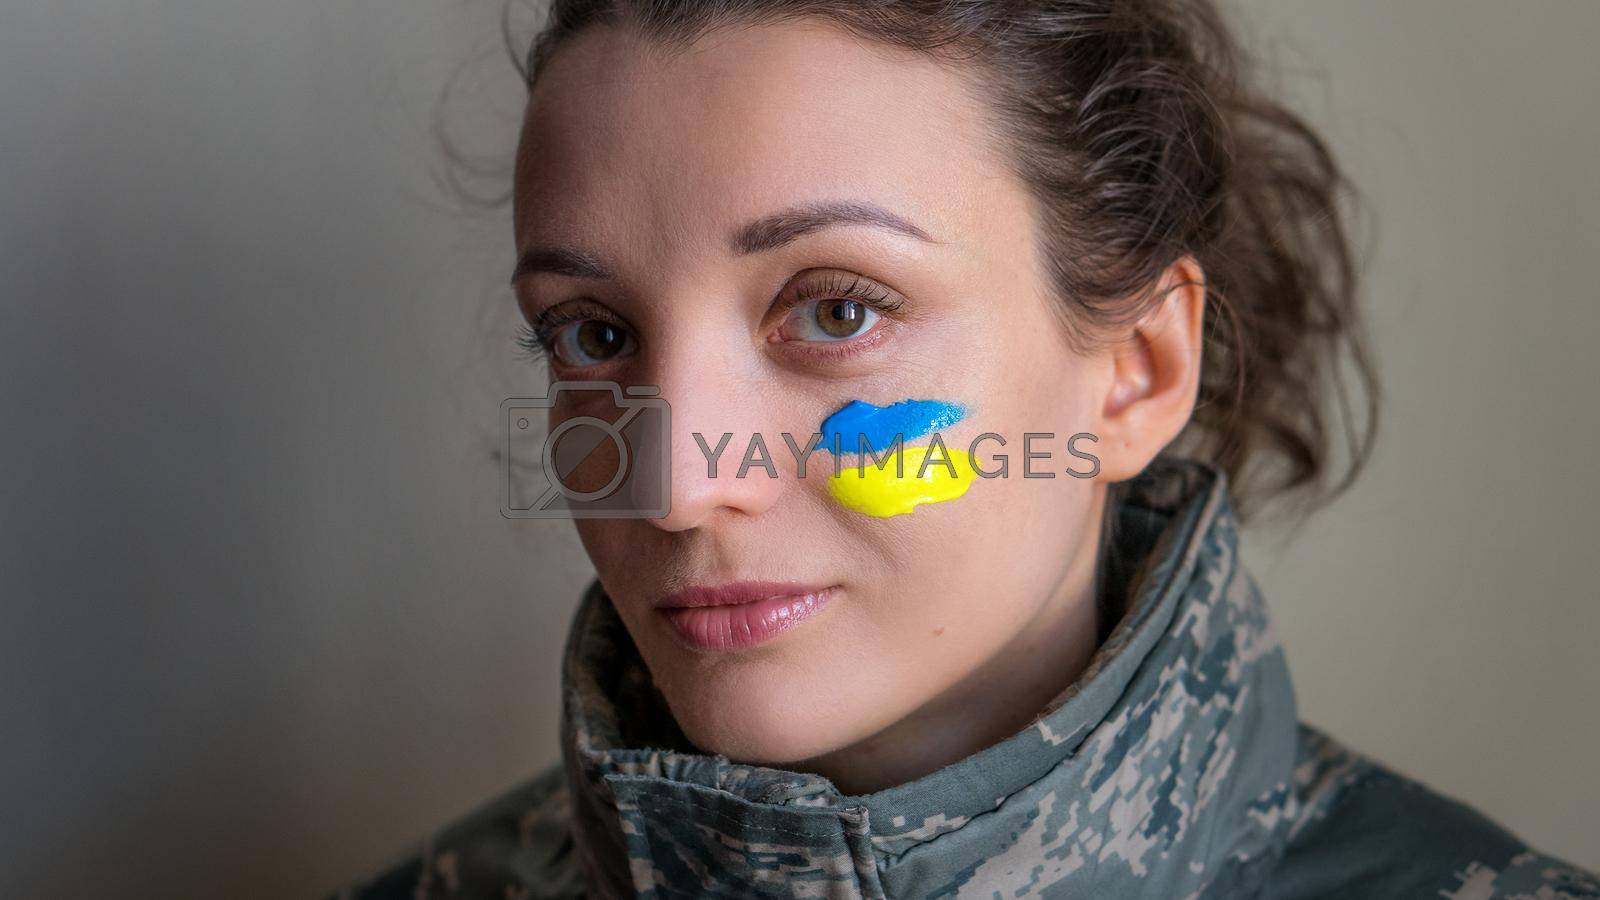 Royalty free image of Indoor portrait of young girl with blue and yellow ukrainian flag on her cheek wearing military uniform, mandatory conscription in Ukraine, equality concepts by balinska_lv